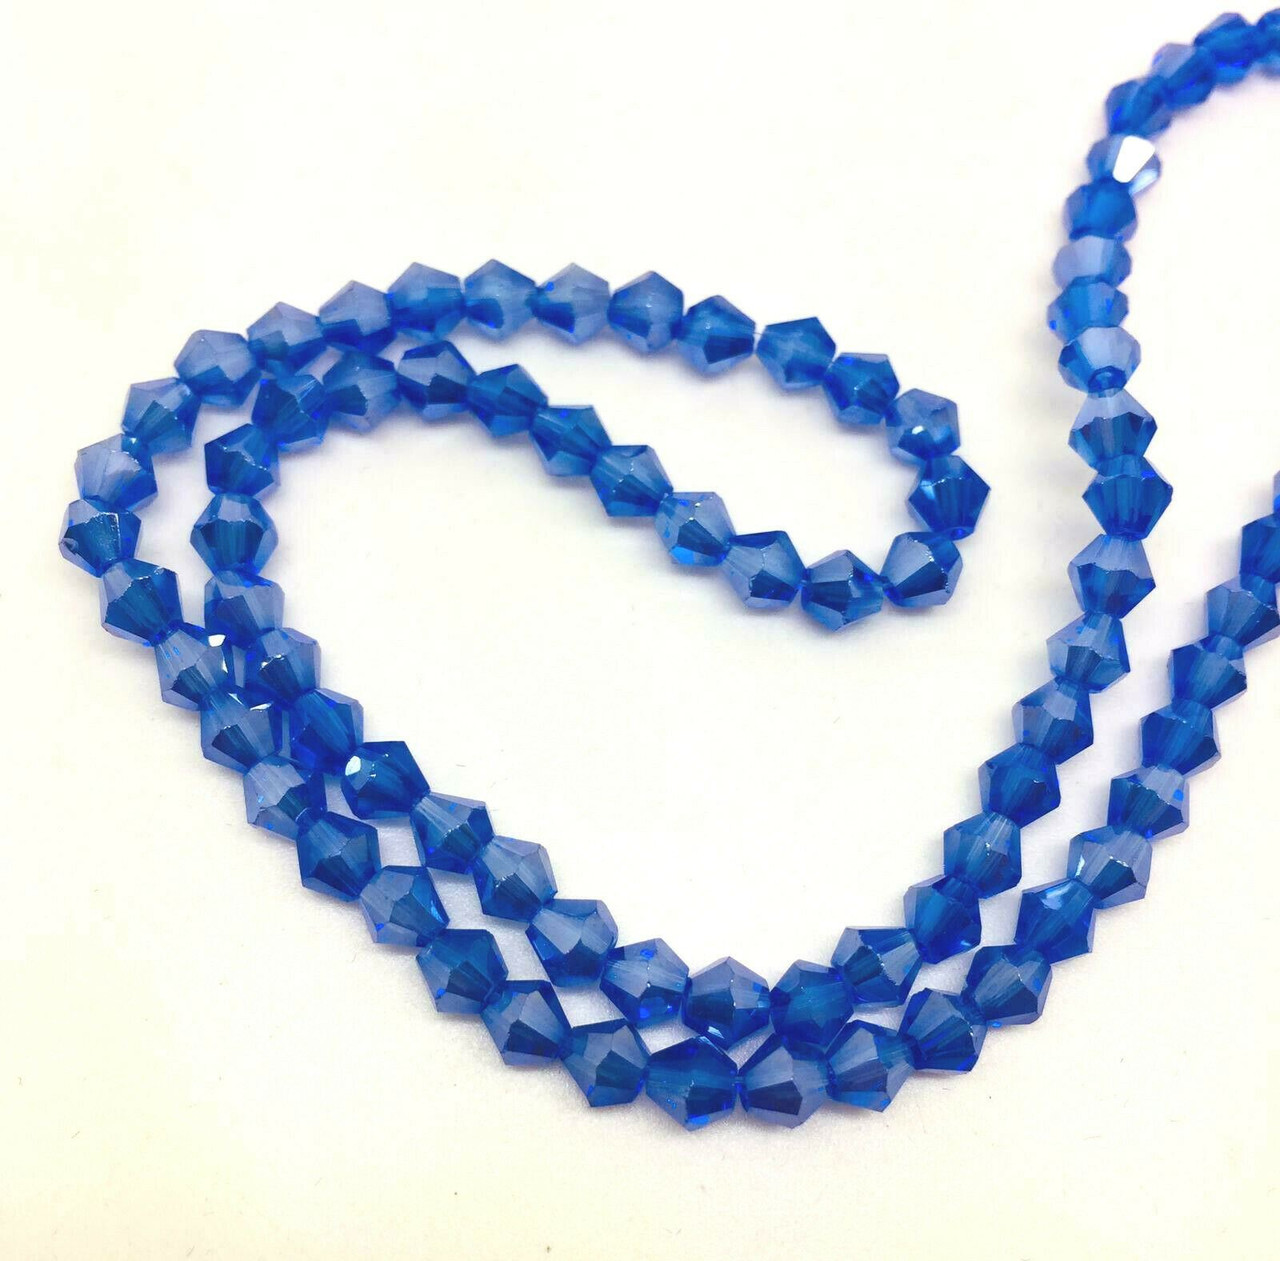 4mm Glass Bicone beads - DEEP BLUE LUSTERED - approx 16" strand (115-120 beads)